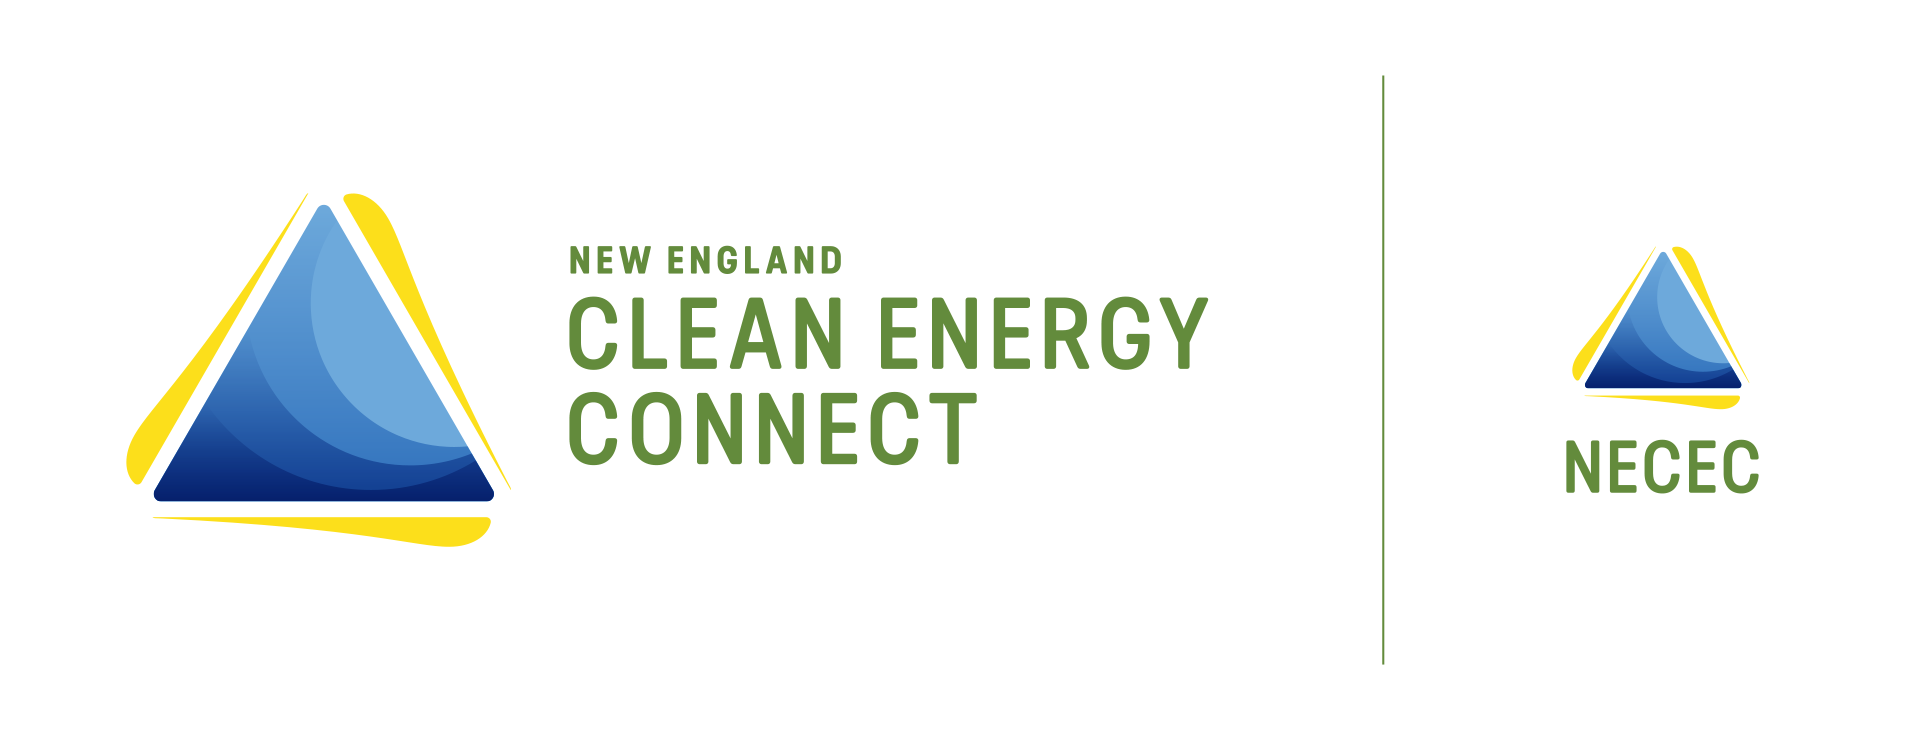 new_england_clean_energy_connect_01_logo.png